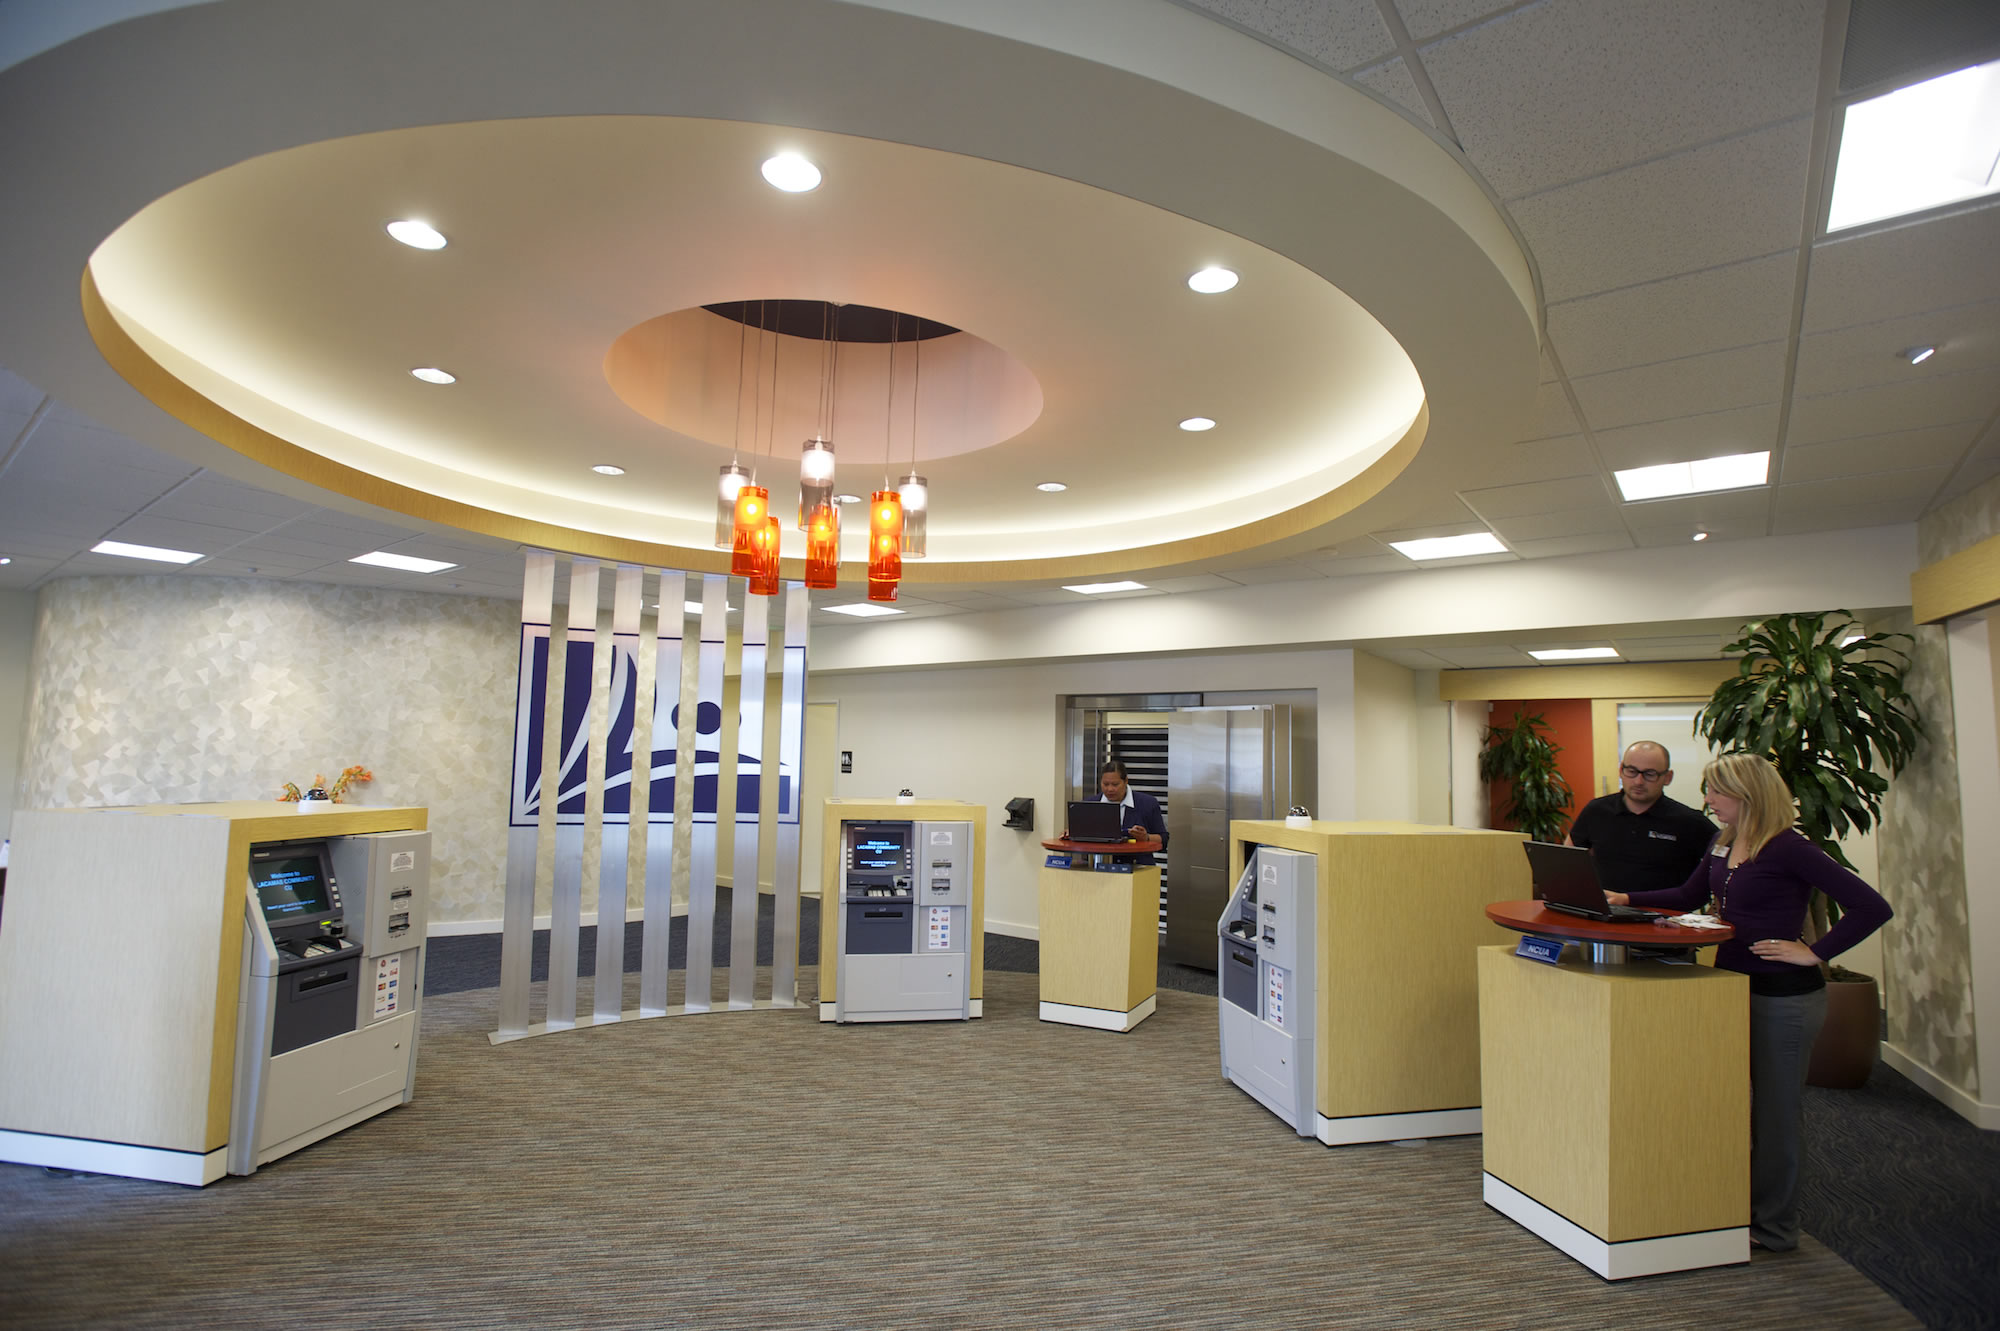 The Lacamas Community Credit Union's new branch at 6724 N.E. 42nd St. is open. It features specialized services and a more open design to its lobby.